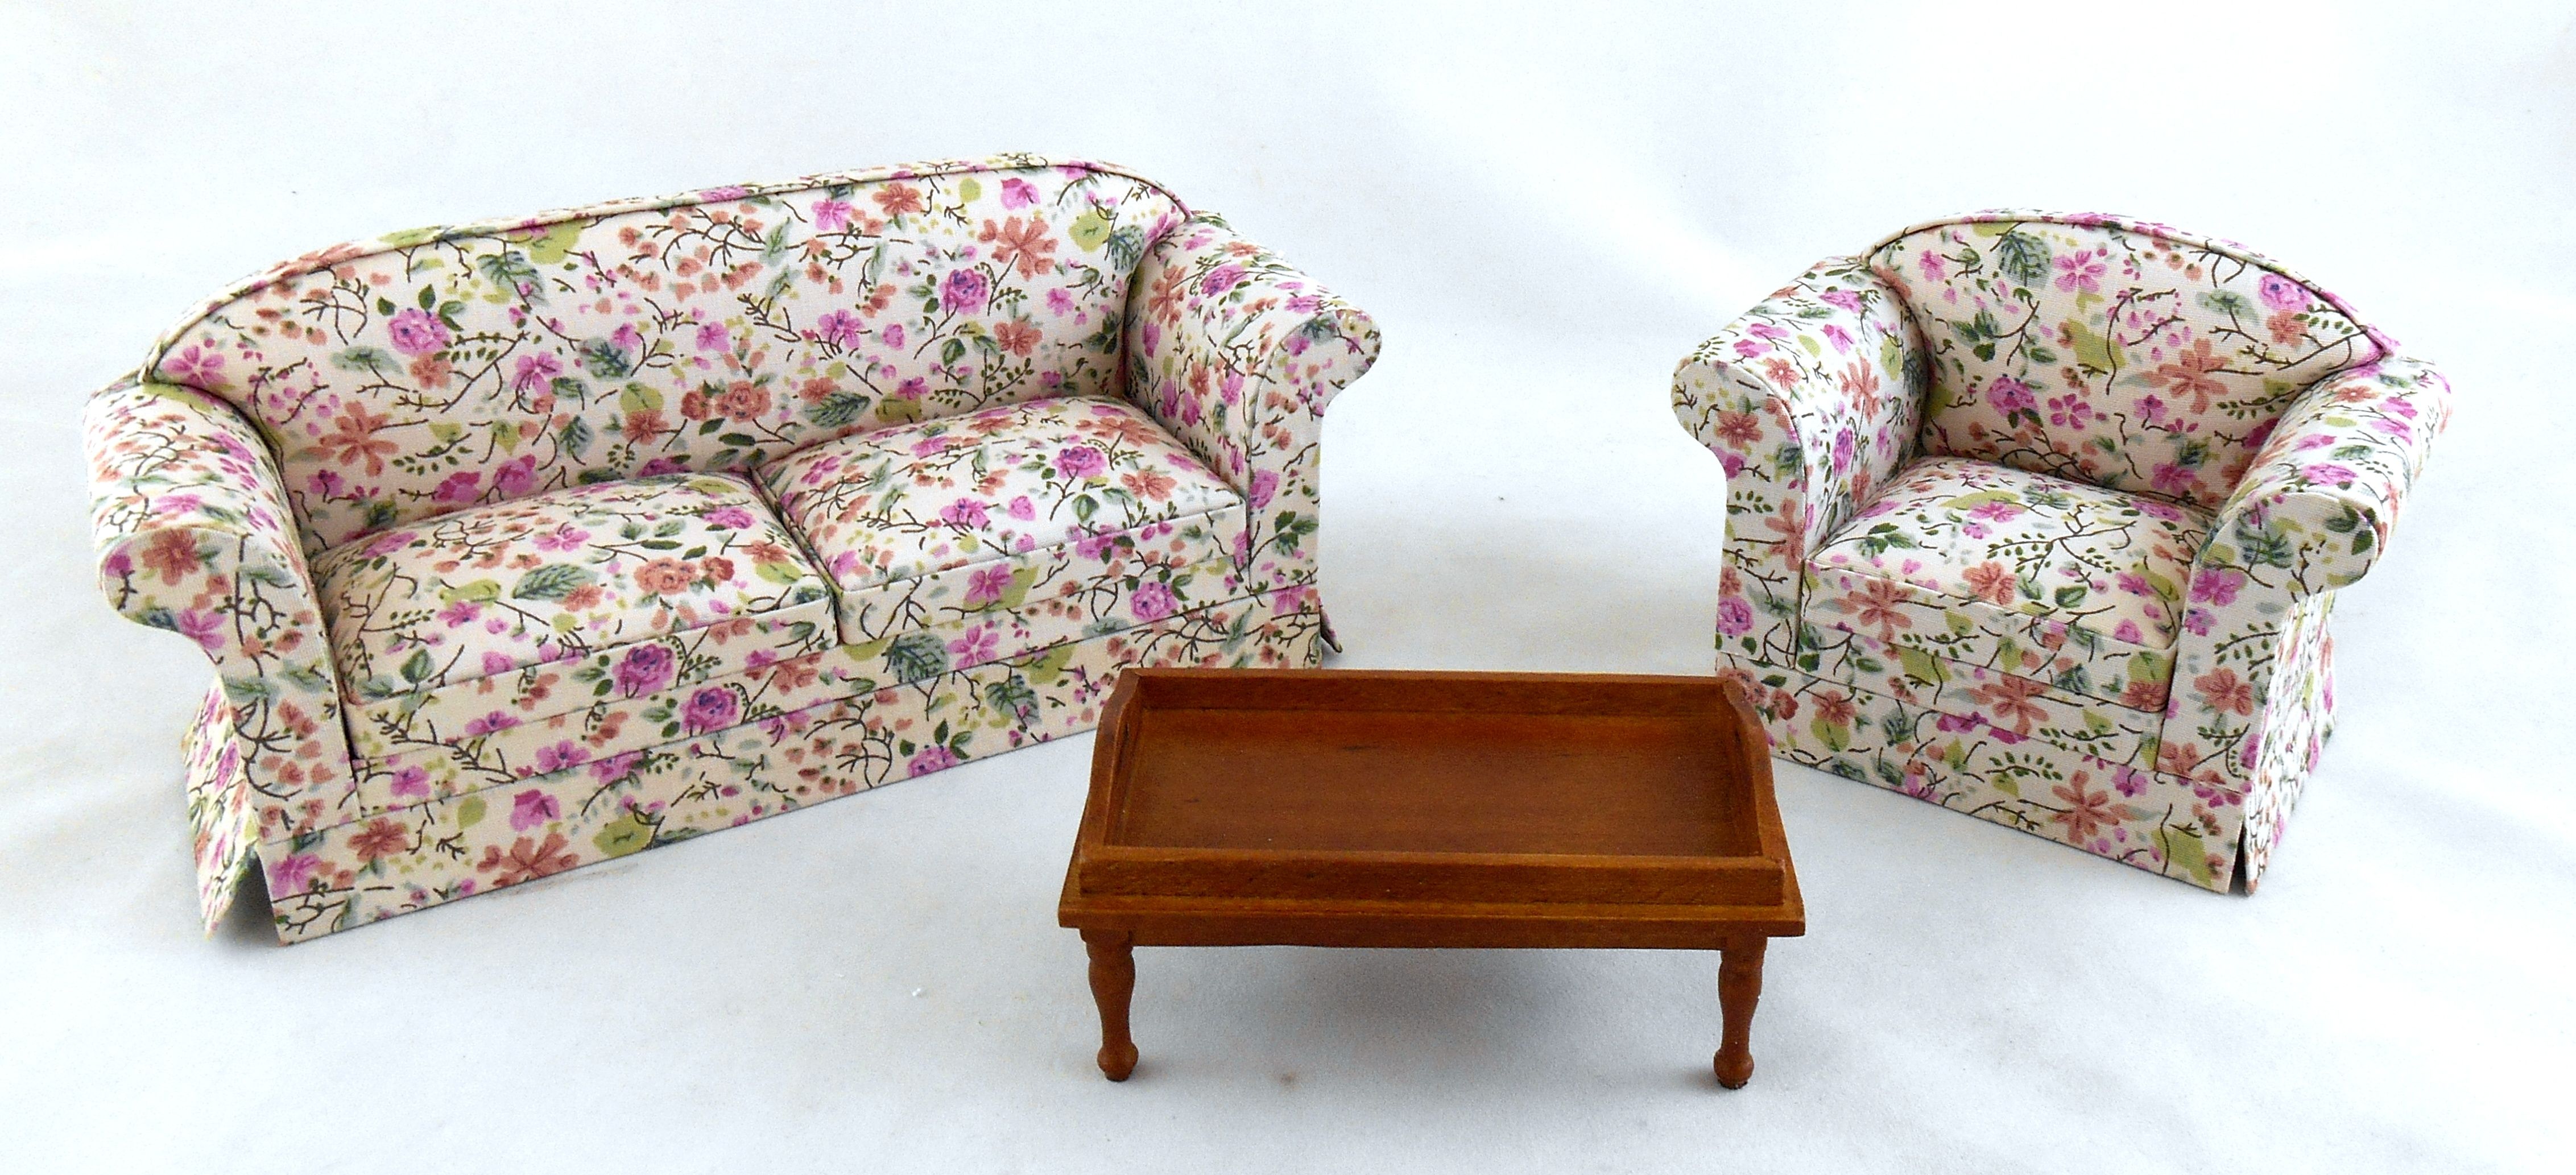 Floral Living Room Sets Floral Living Room Sets Modern House Pertaining To Chintz Floral Sofas (View 8 of 15)